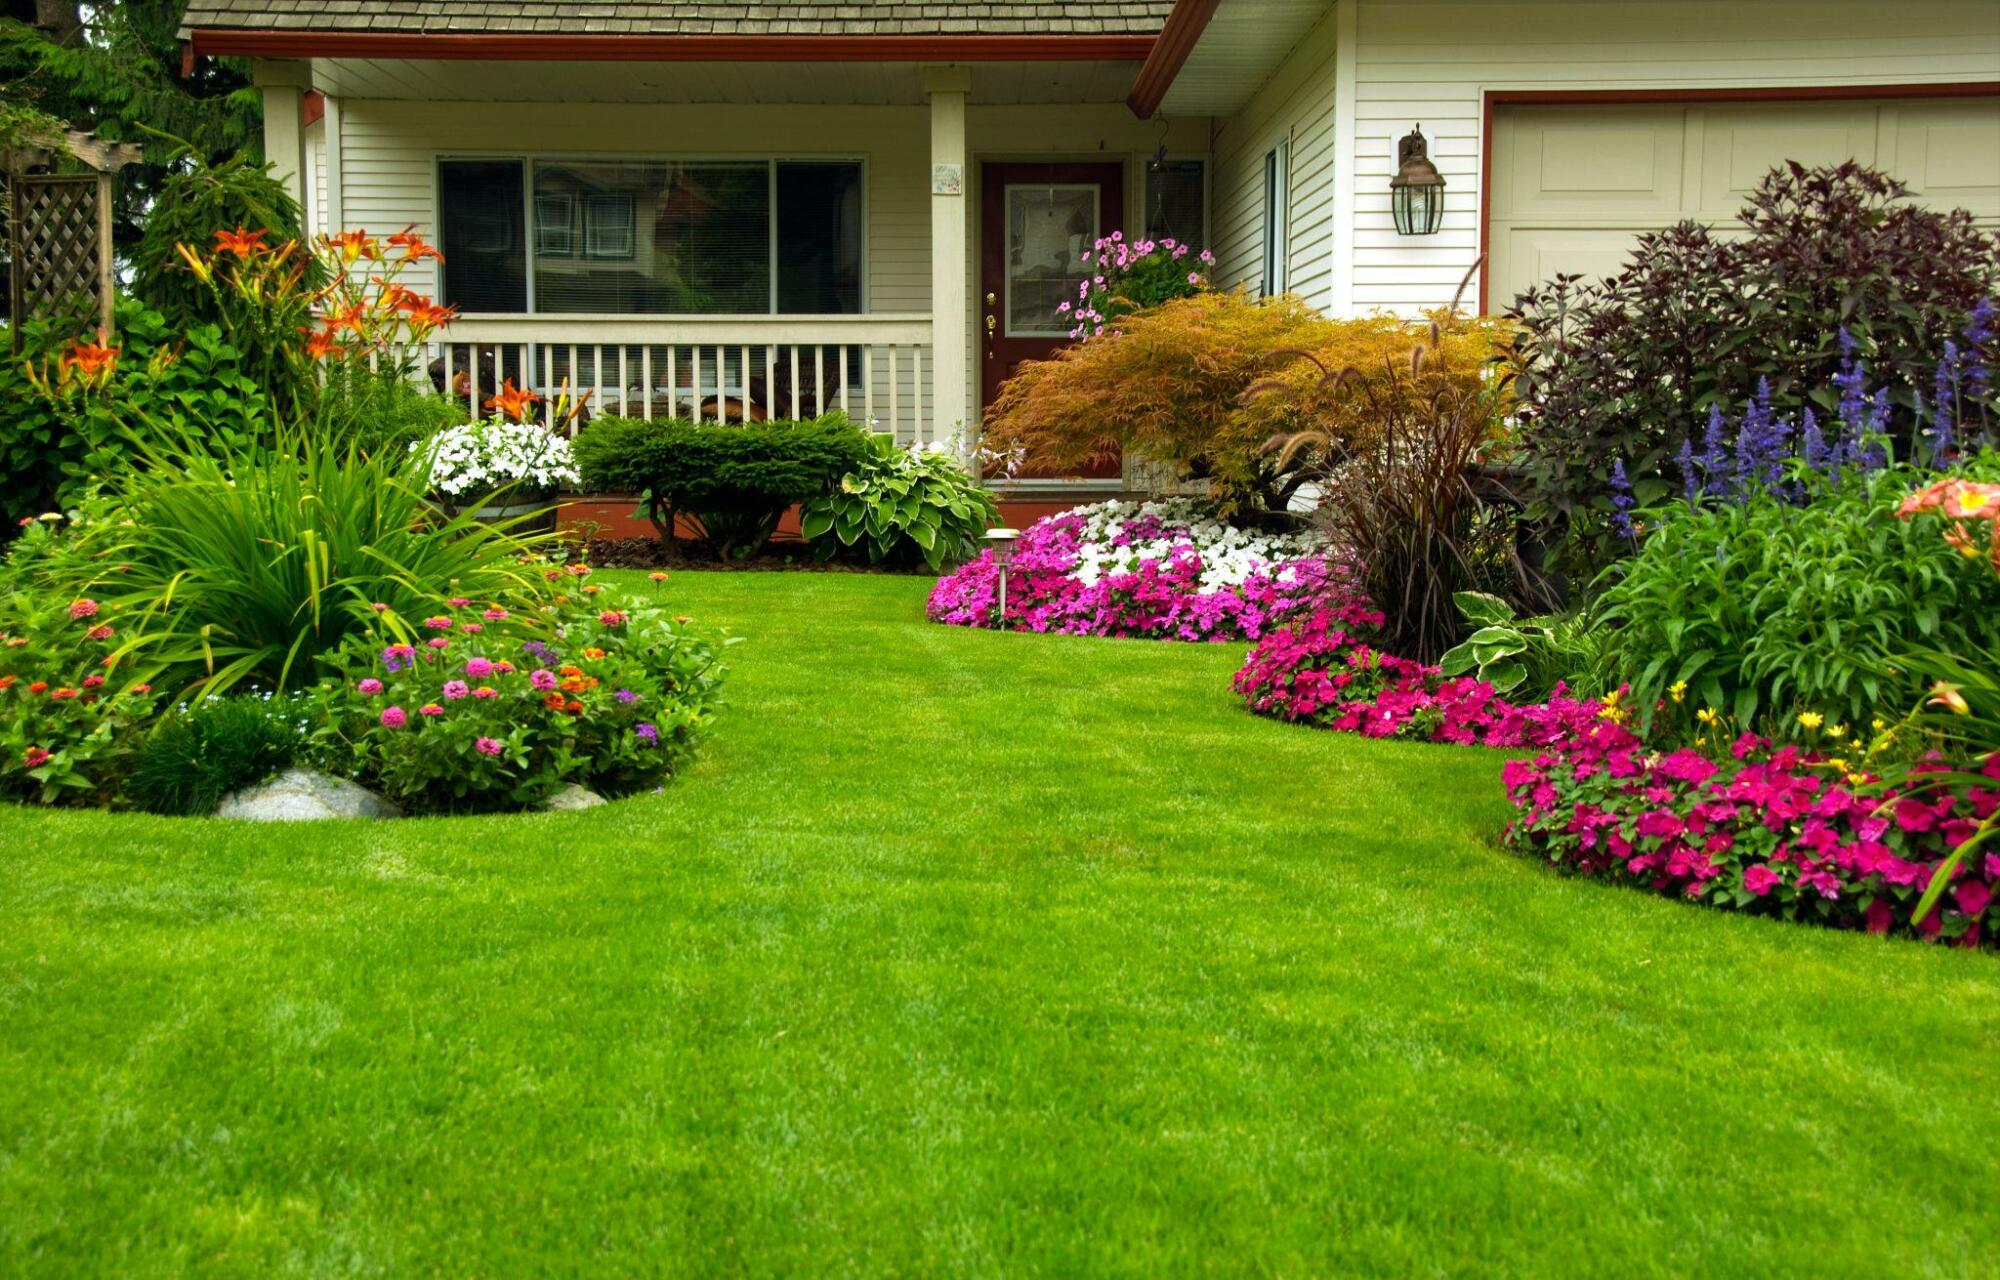 A transforming garden with flowers in front of a house.